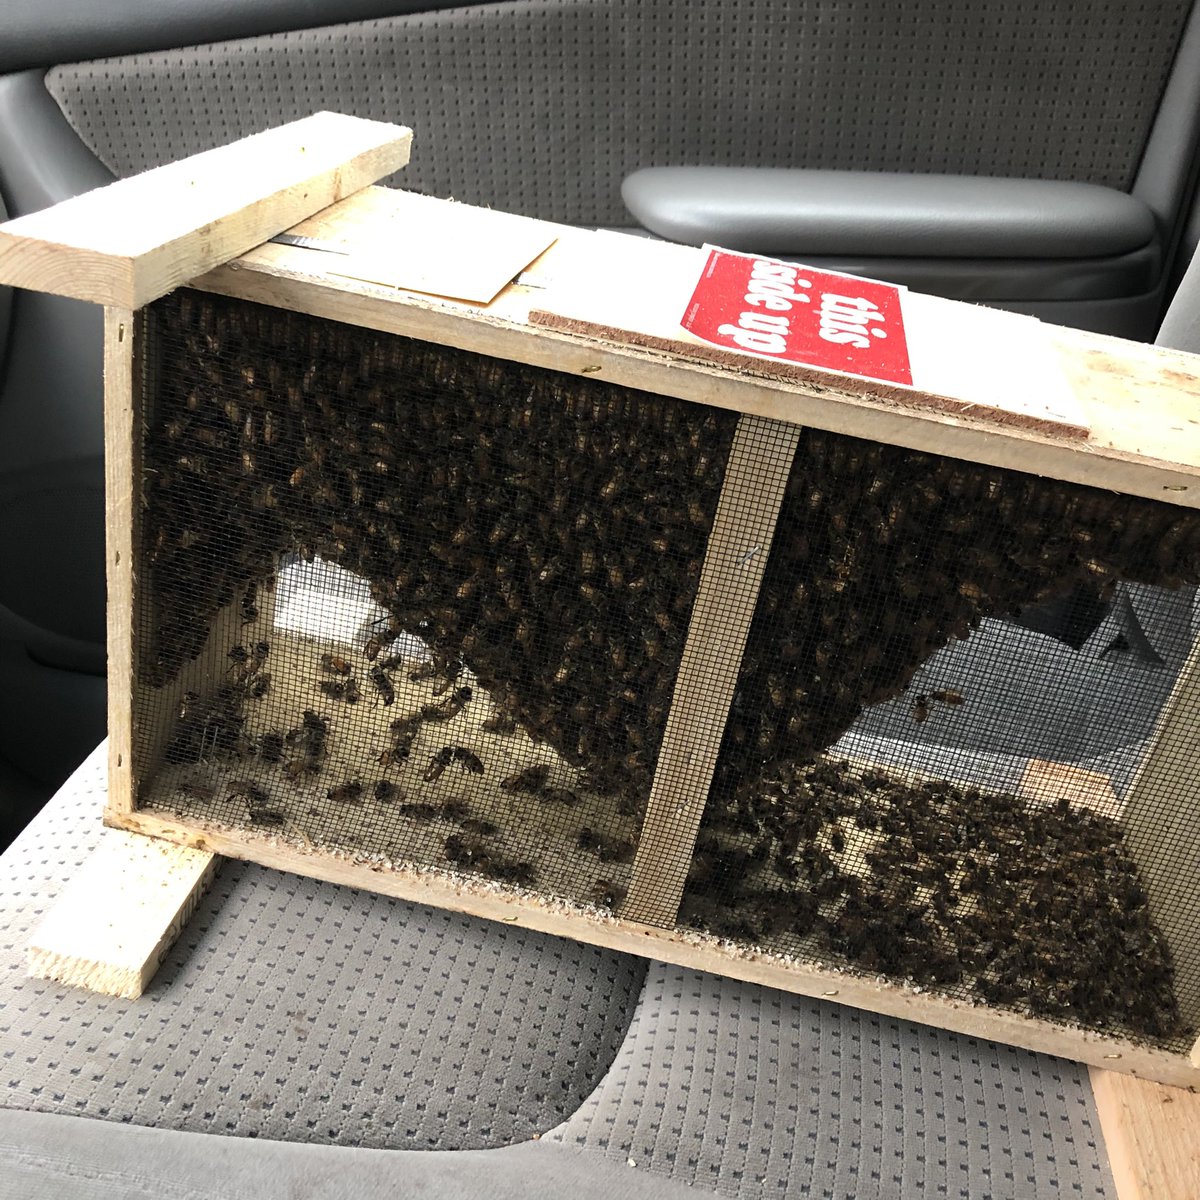 Got my new bees. I became a beekeeper last April when we had a swarm land in our backyard. I lost that hive over winter, so I’m trying again.